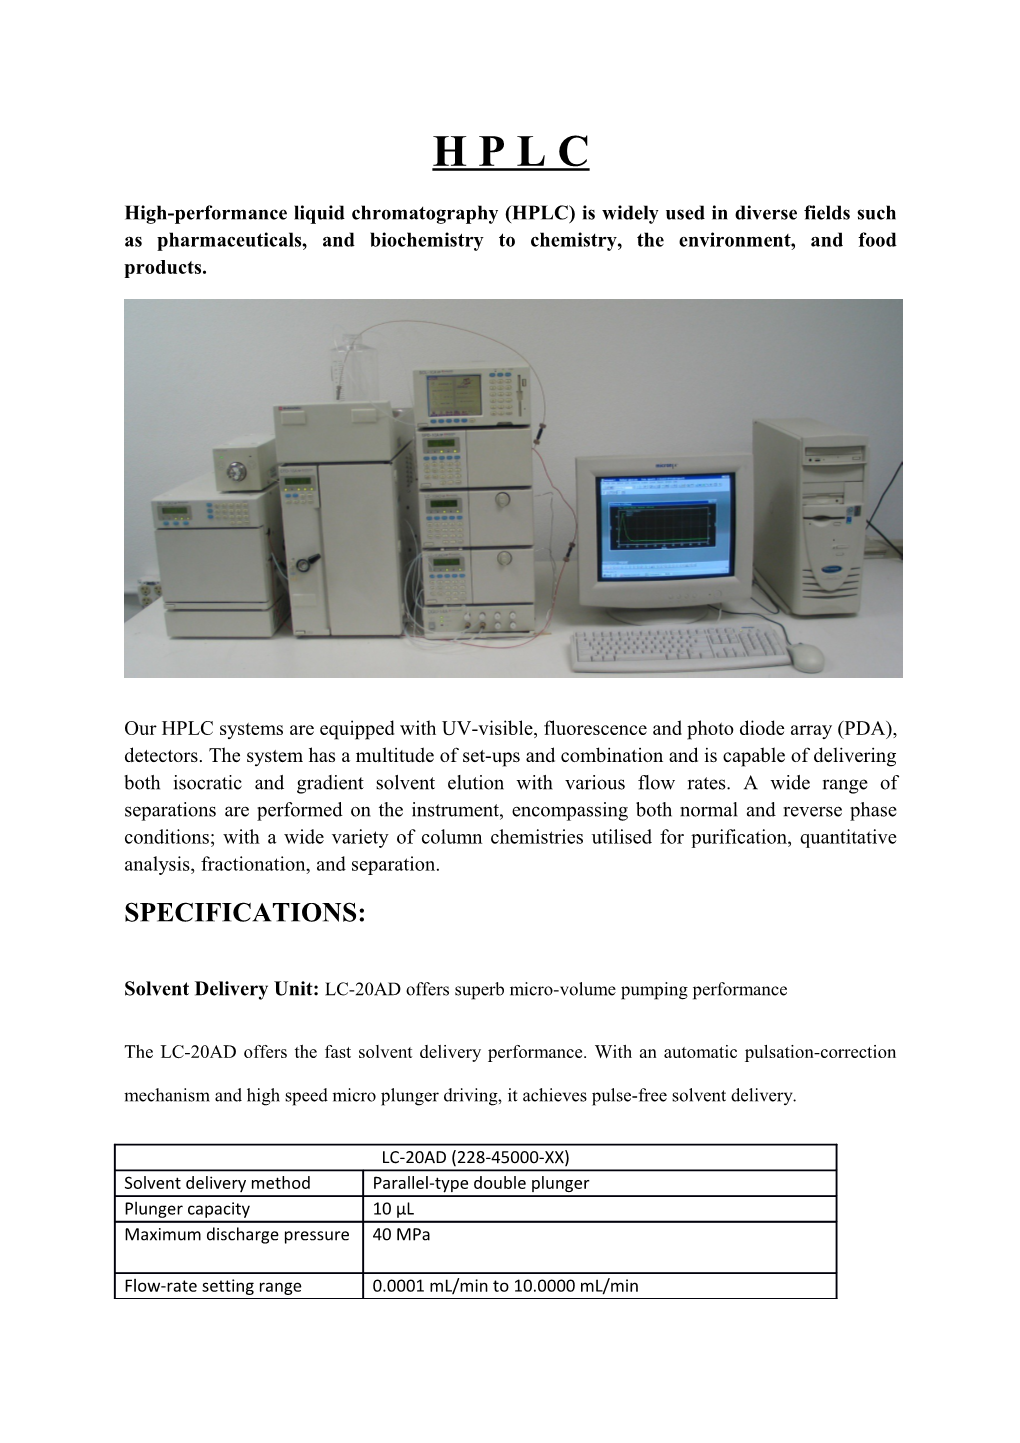 High-Performance Liquid Chromatography (HPLC) Is Widely Used in Diverse Fields Such As